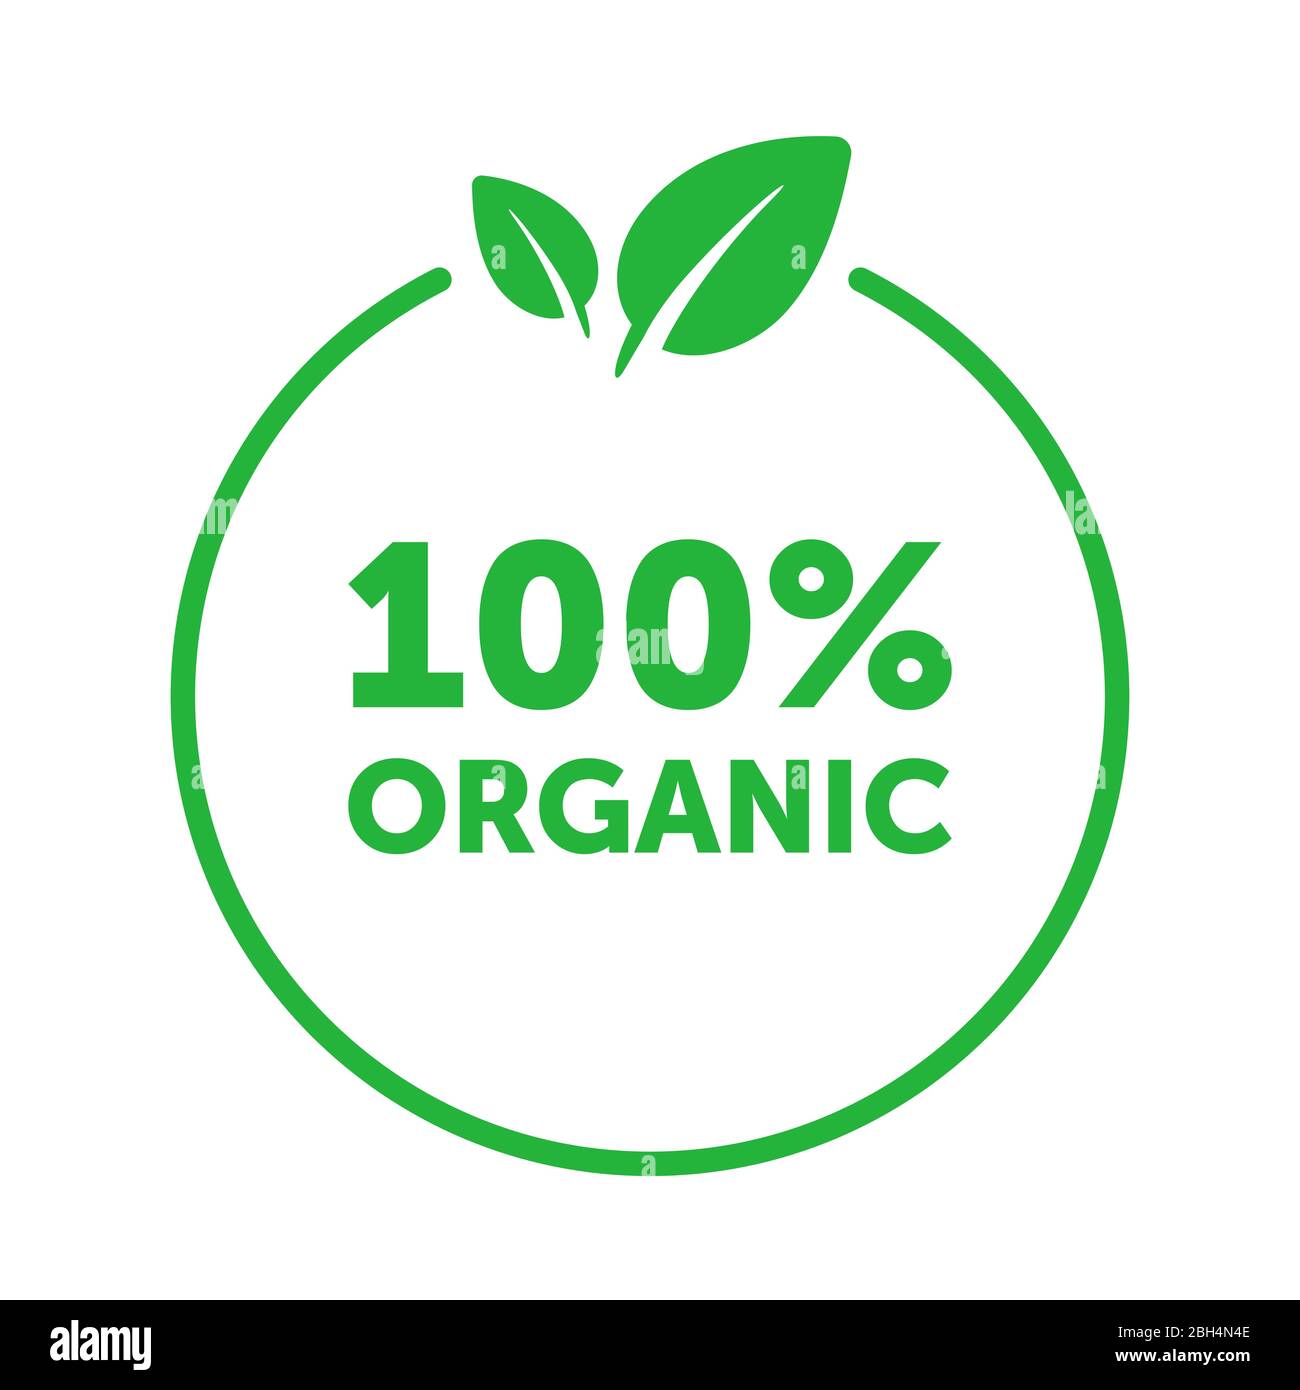 Organic 100 percent circle badge with green leaf. Design element for packaging design and promotional material. Vector illustration. Stock Vector